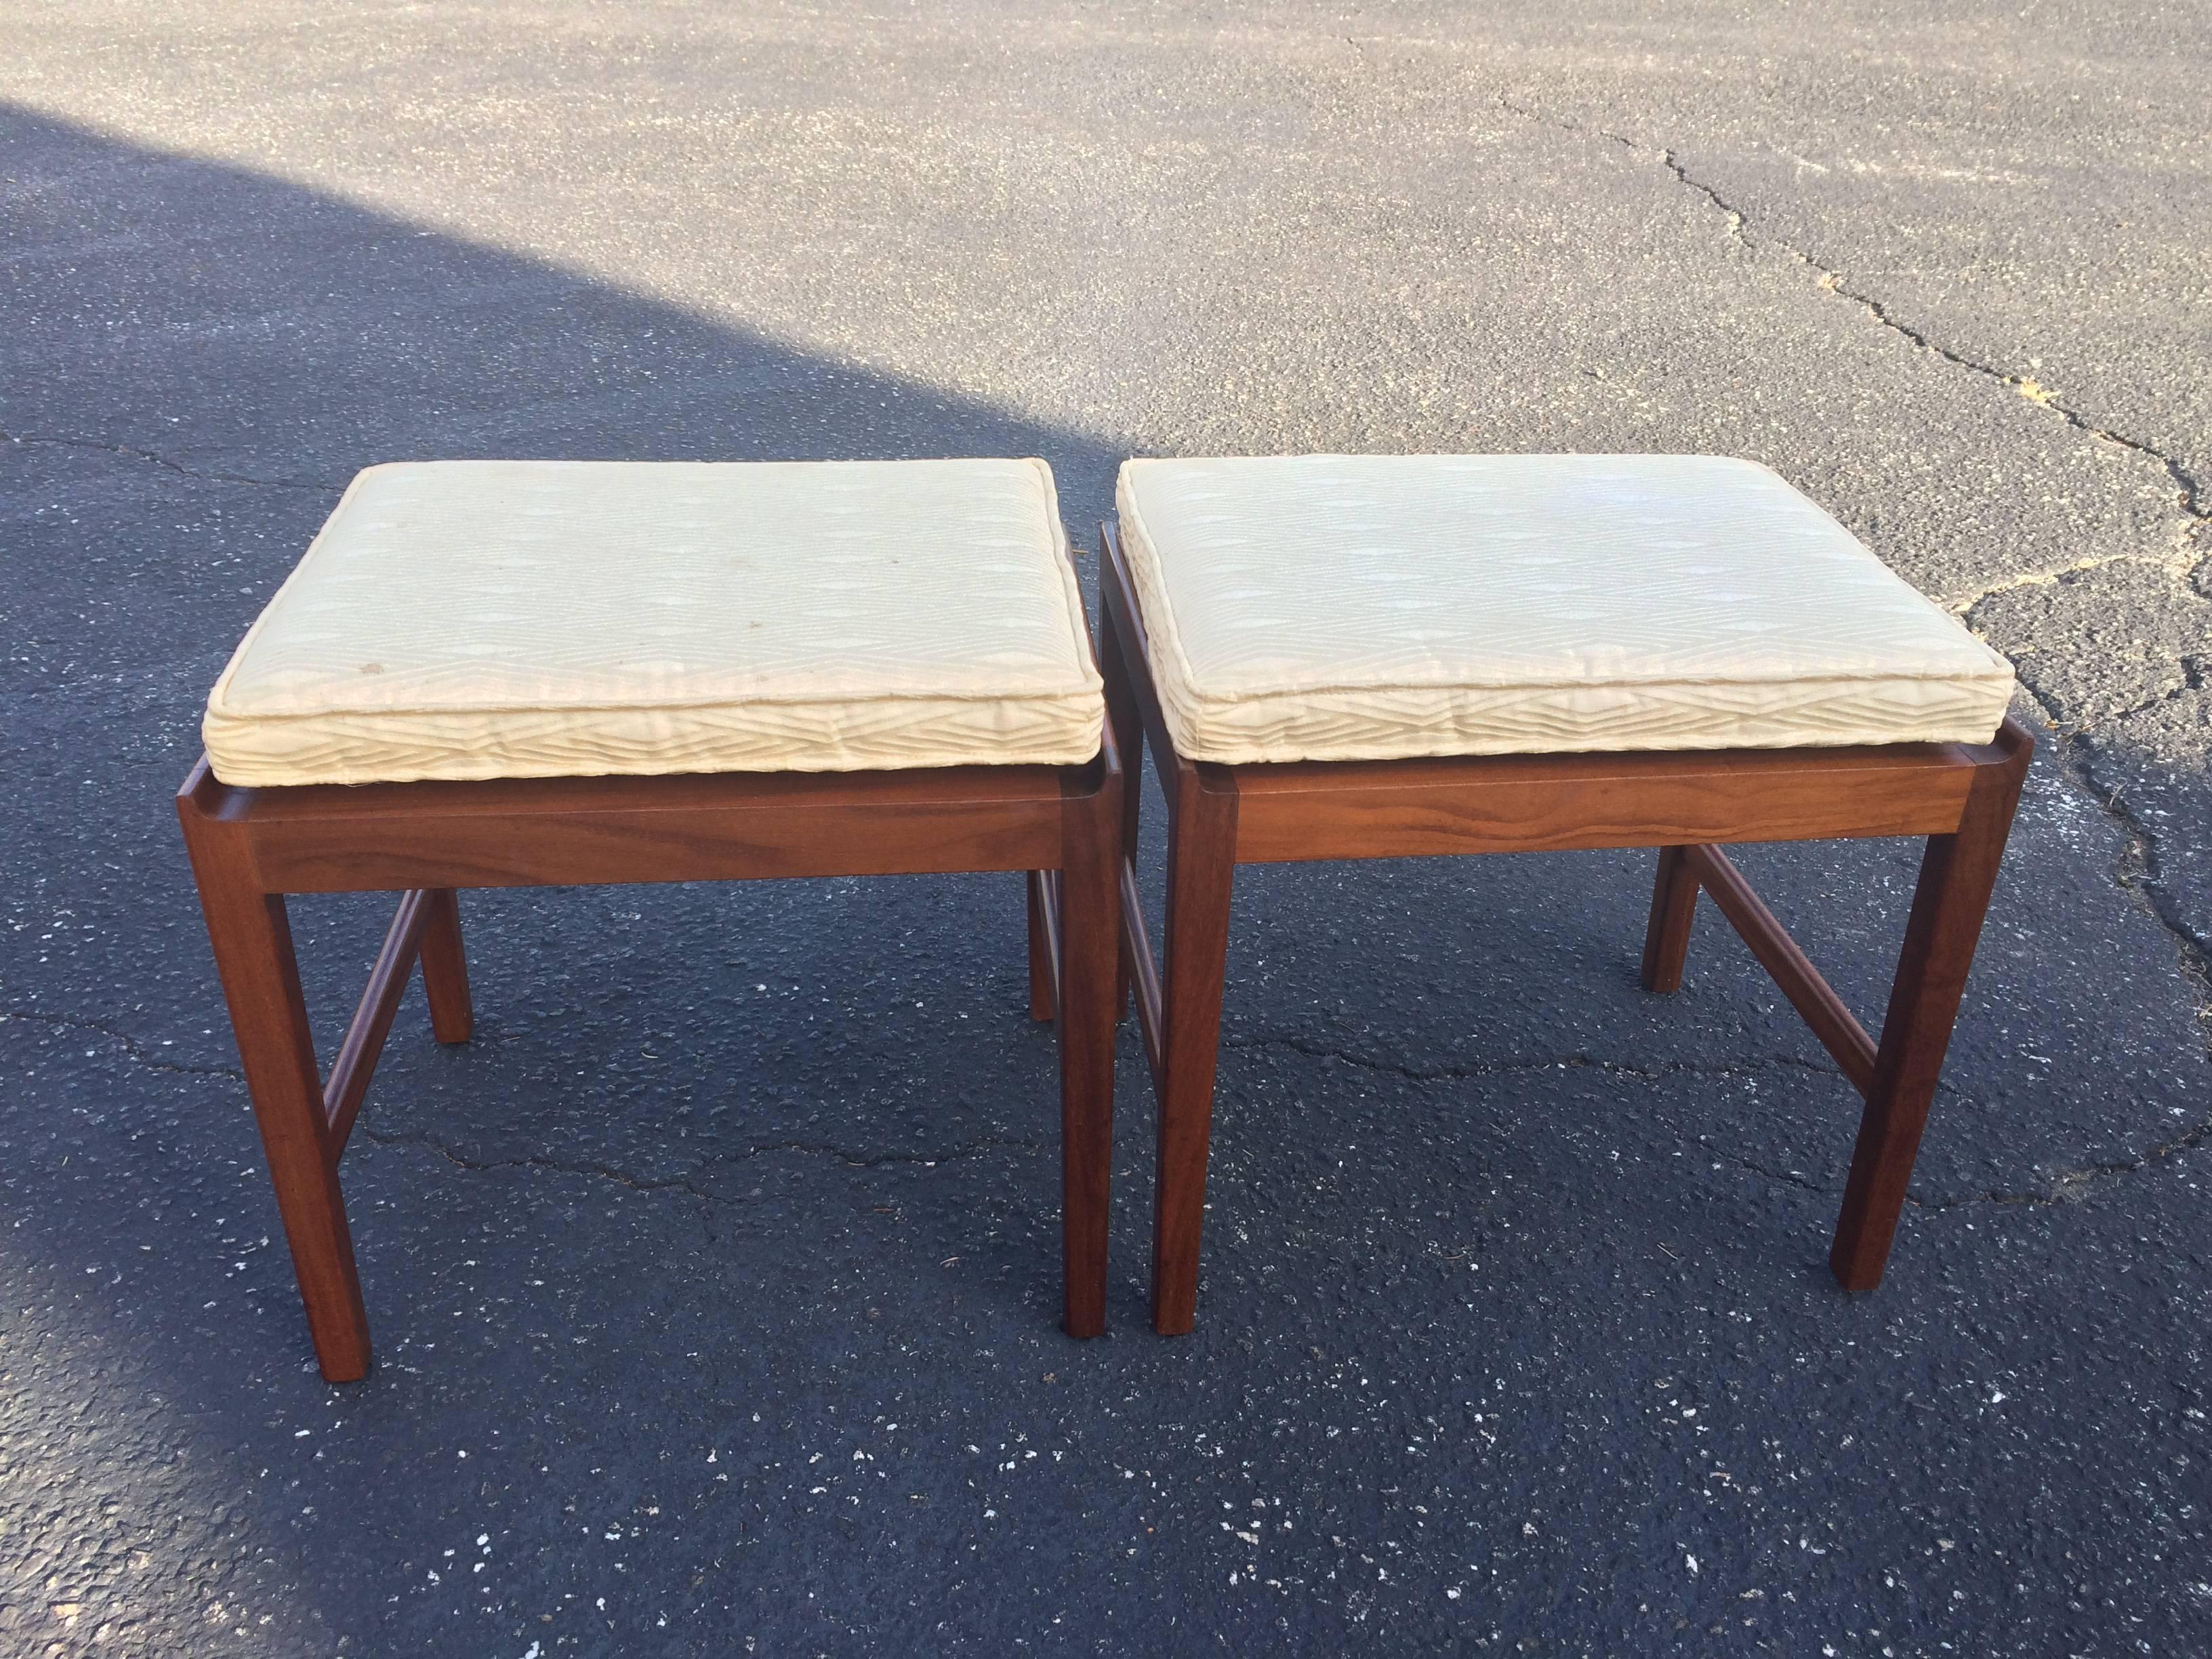 This item has SOLD
Pair of signed Swedish teak stools with cushions. Signed made in Sweden by Skaraborgs Möbelindustri Tibro. Cushions are loose . Measurements with cushions: 18 H x 14.25 D x 18.25 W. Very good condition. Cushions have some stains.